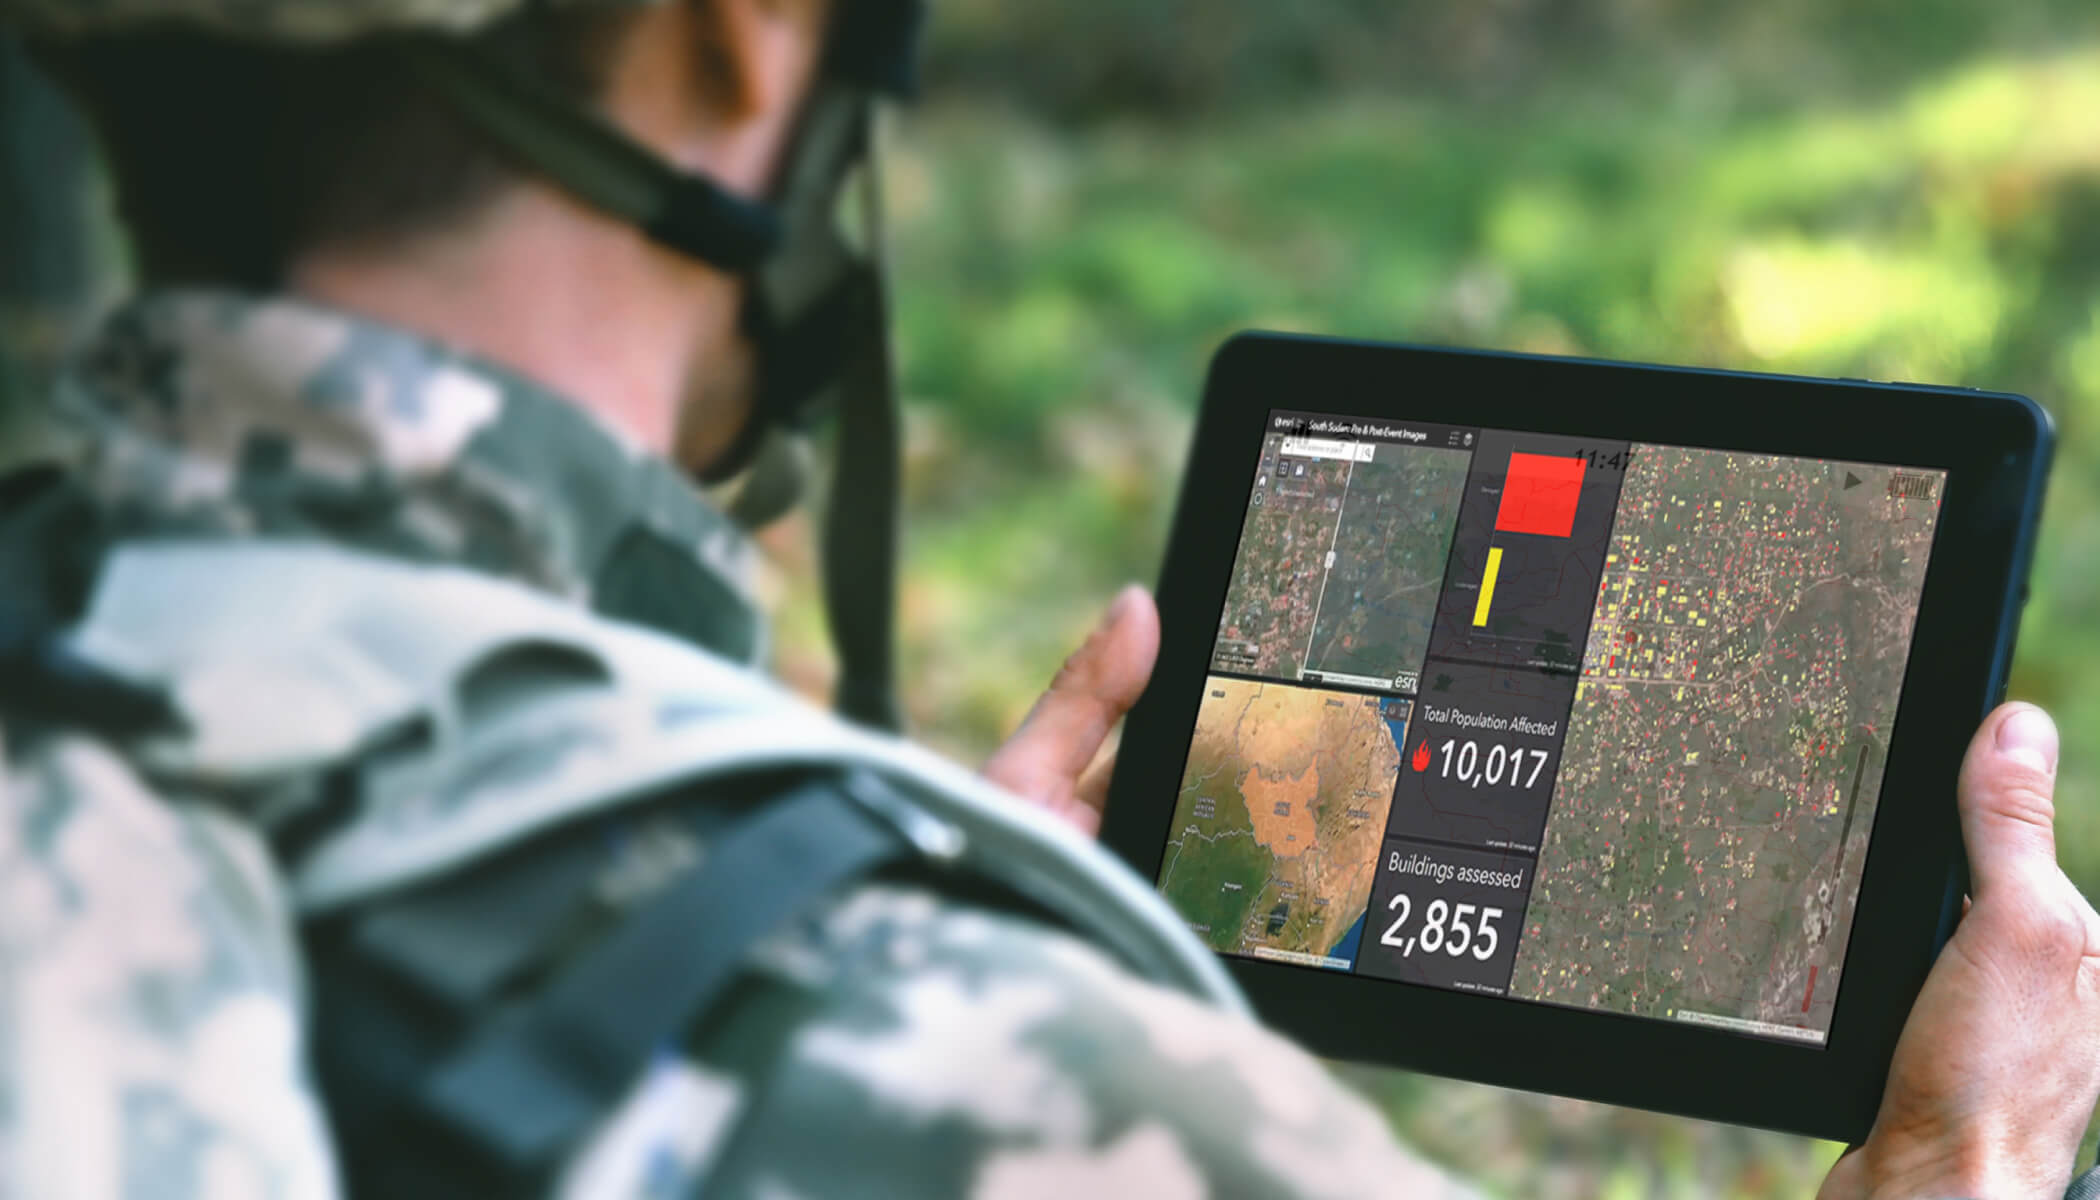 A soldier wearing a combat uniform and helmet holding a tablet displaying a map dashboard